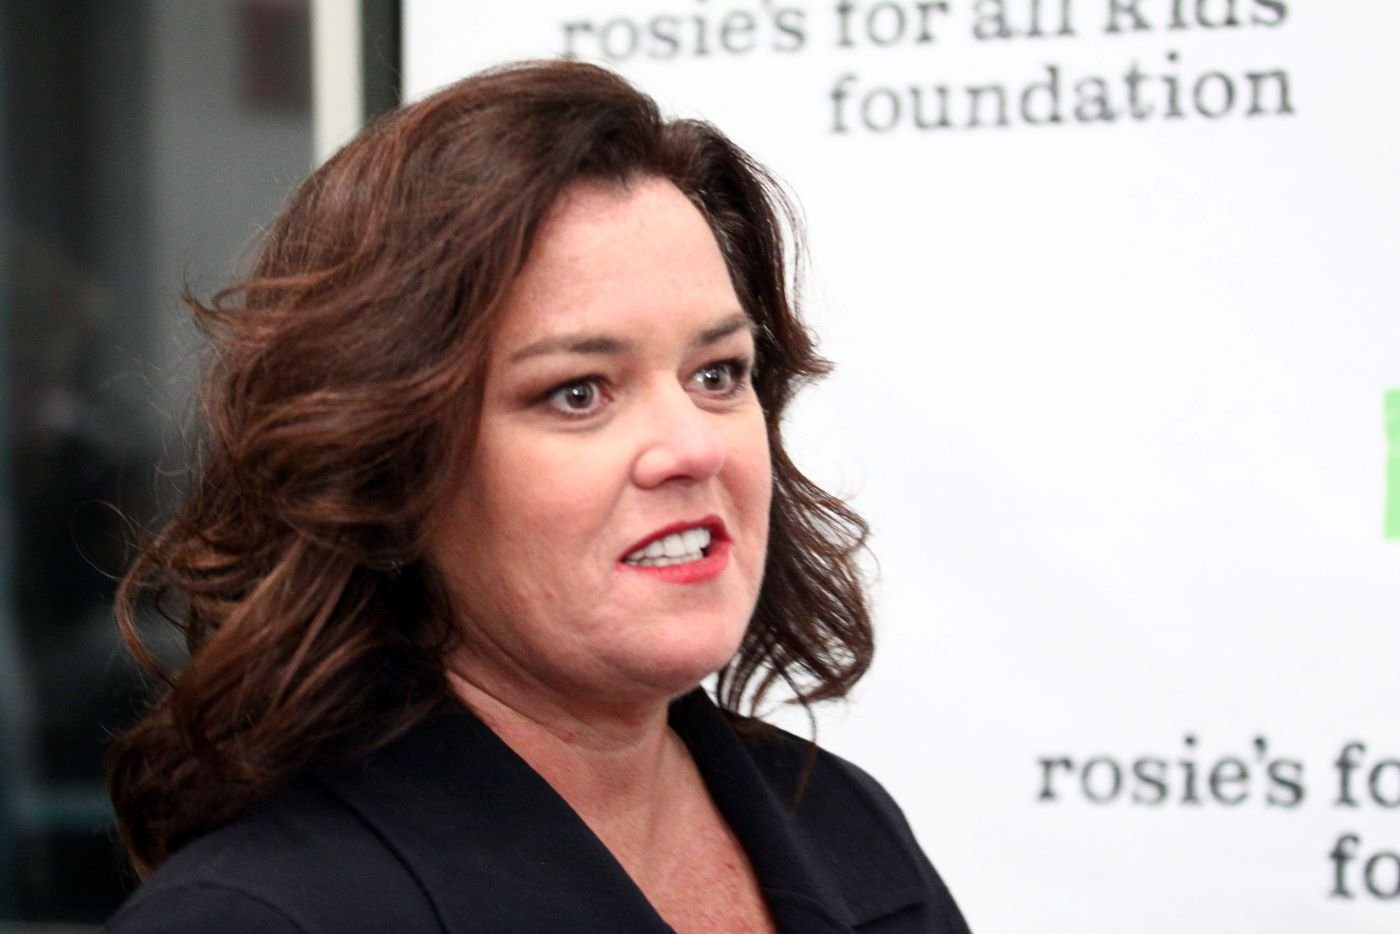 Rosie O'Donnell wearing a black jacket with a black undershirt in front of a white backdrop with black writing.